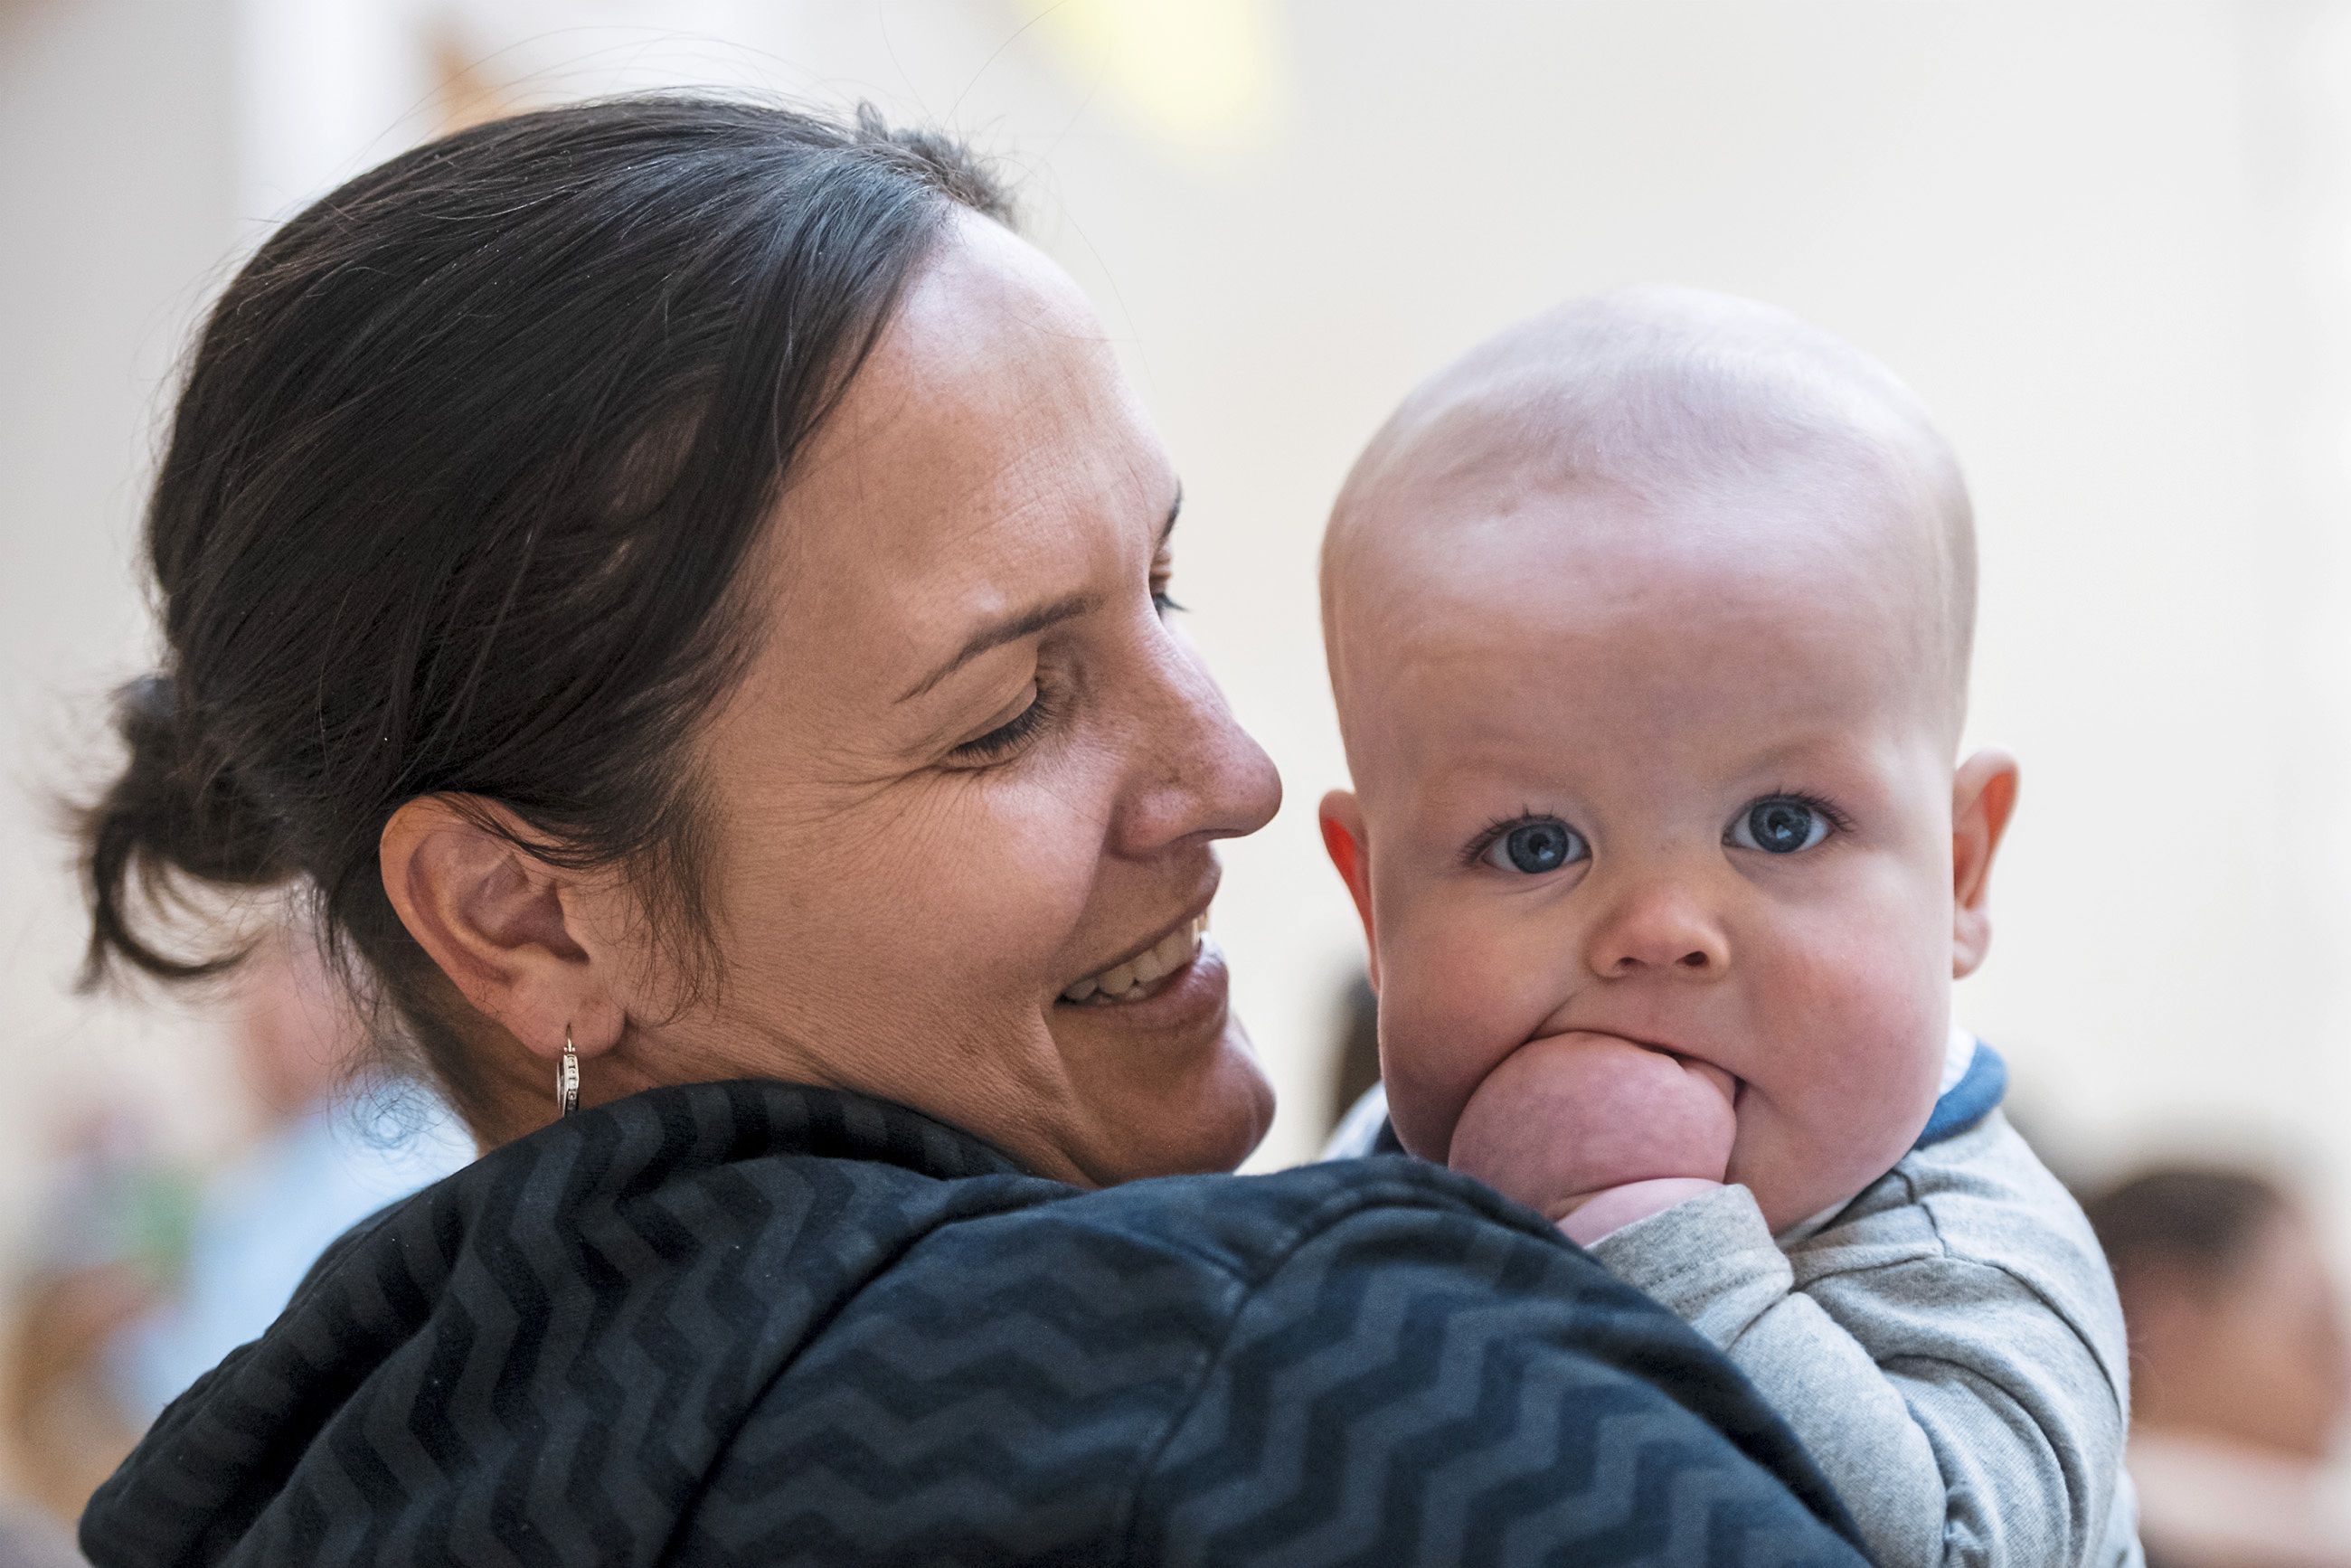 Claire Johnstone, of Easterhouse, a suburb in Glasgow, Scotland, holds her 5-month-old son, William, as she joins other mothers at Cafe Stork, Tuesday, Oct. 21, 2019, at Parkhead Congregational Church in Glasgow. Image by Michael M. Santiago. United Kingdom, 2019.